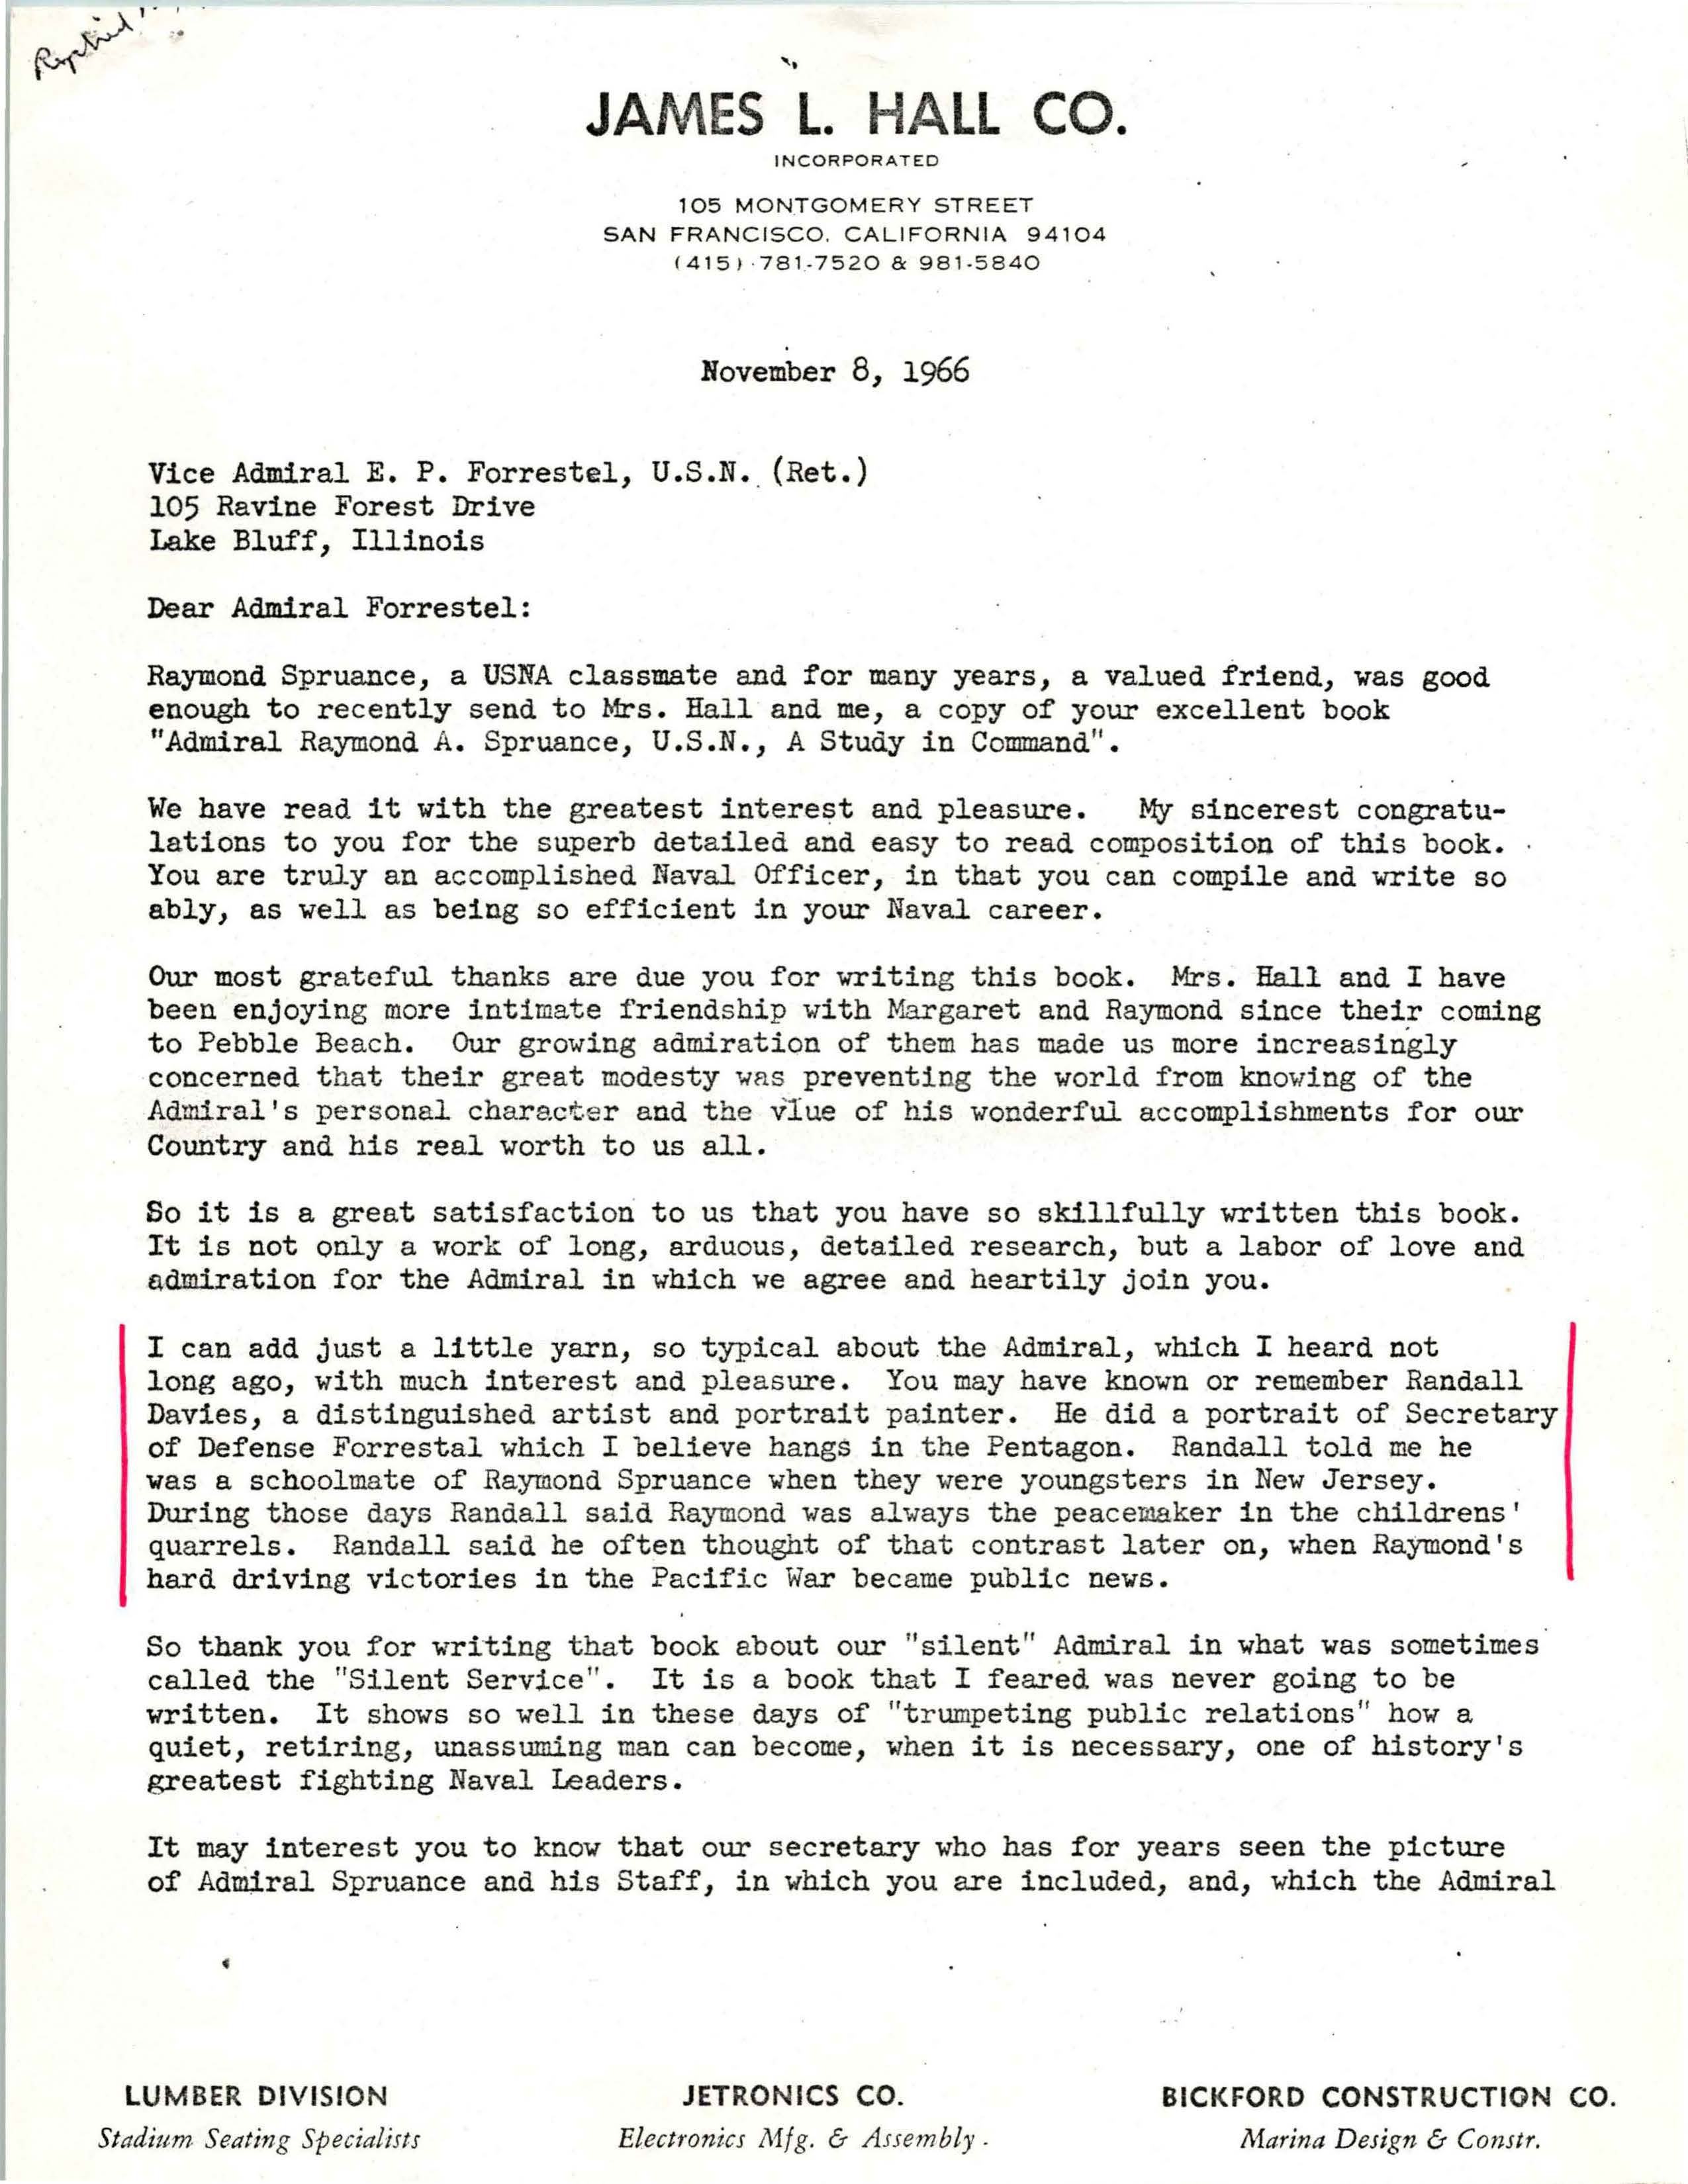 Letter from James L. Hall to VADM E. P. Forrestal